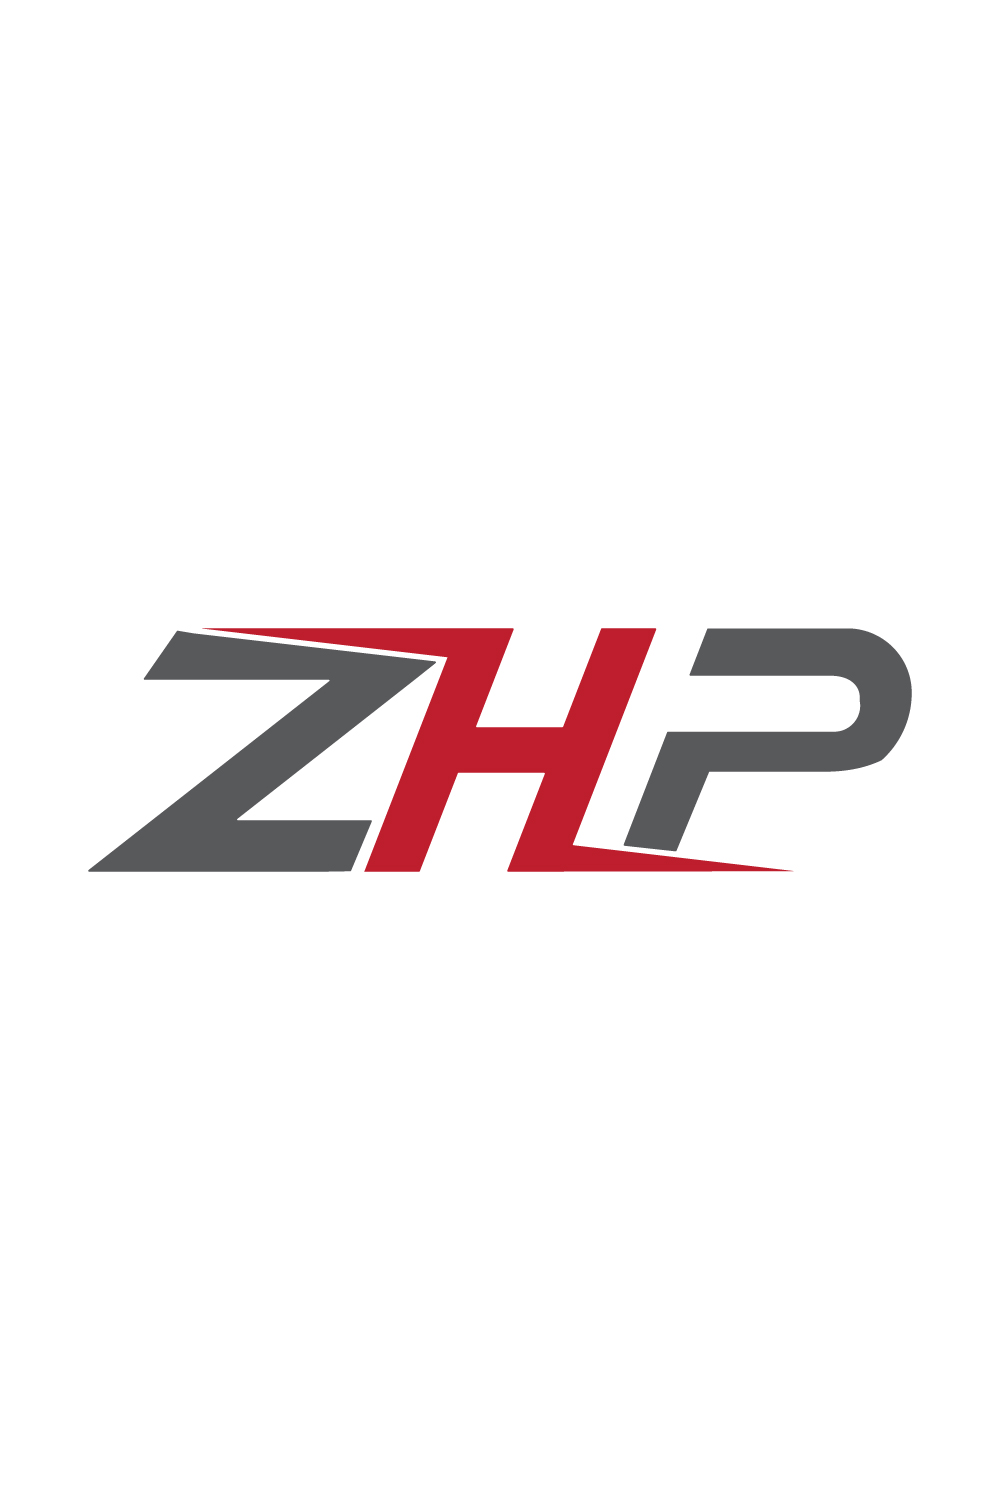 Initials ZHP letters logo design vector images ZHP logo design black and red color best icon PHZ logo design monogram best company identity pinterest preview image.